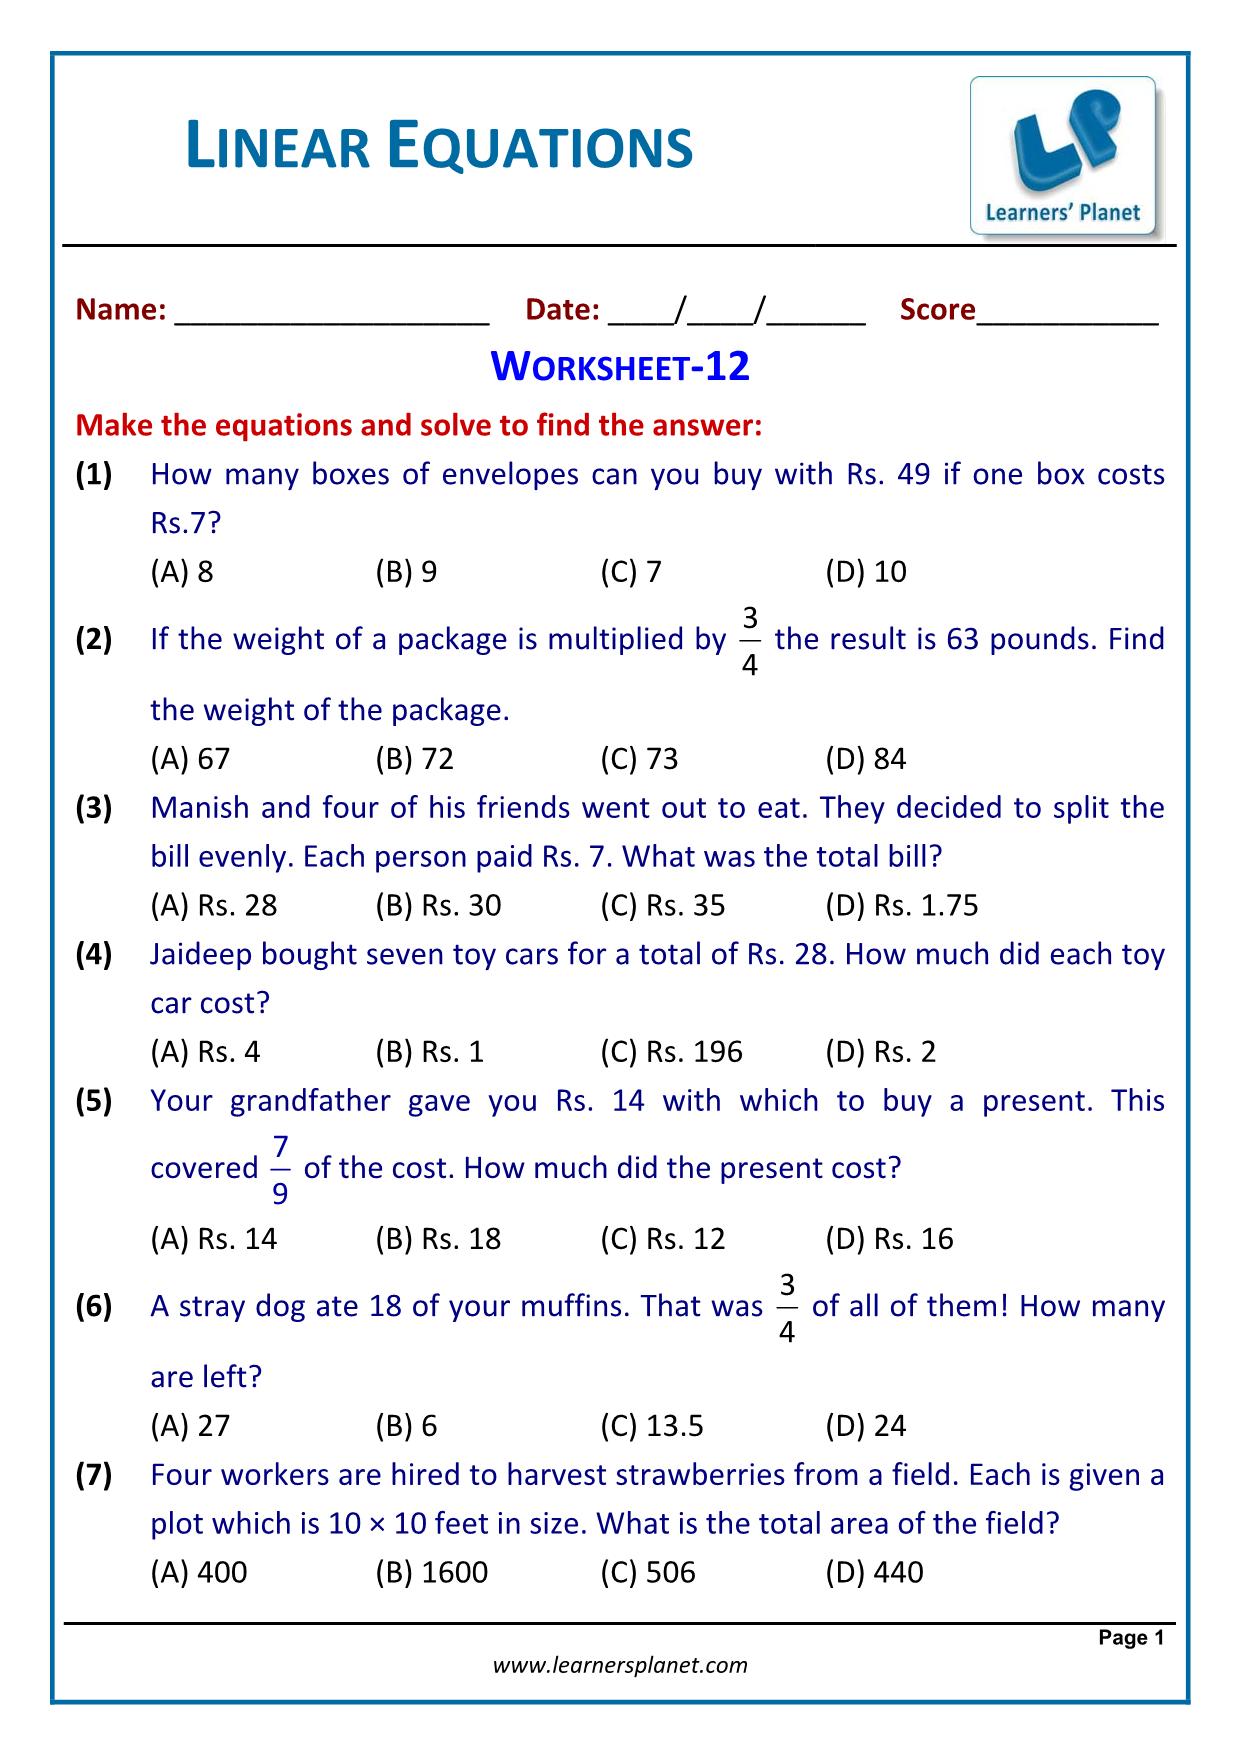 Solve linear equations word problems worksheet grade 11 With Linear Functions Word Problems Worksheet